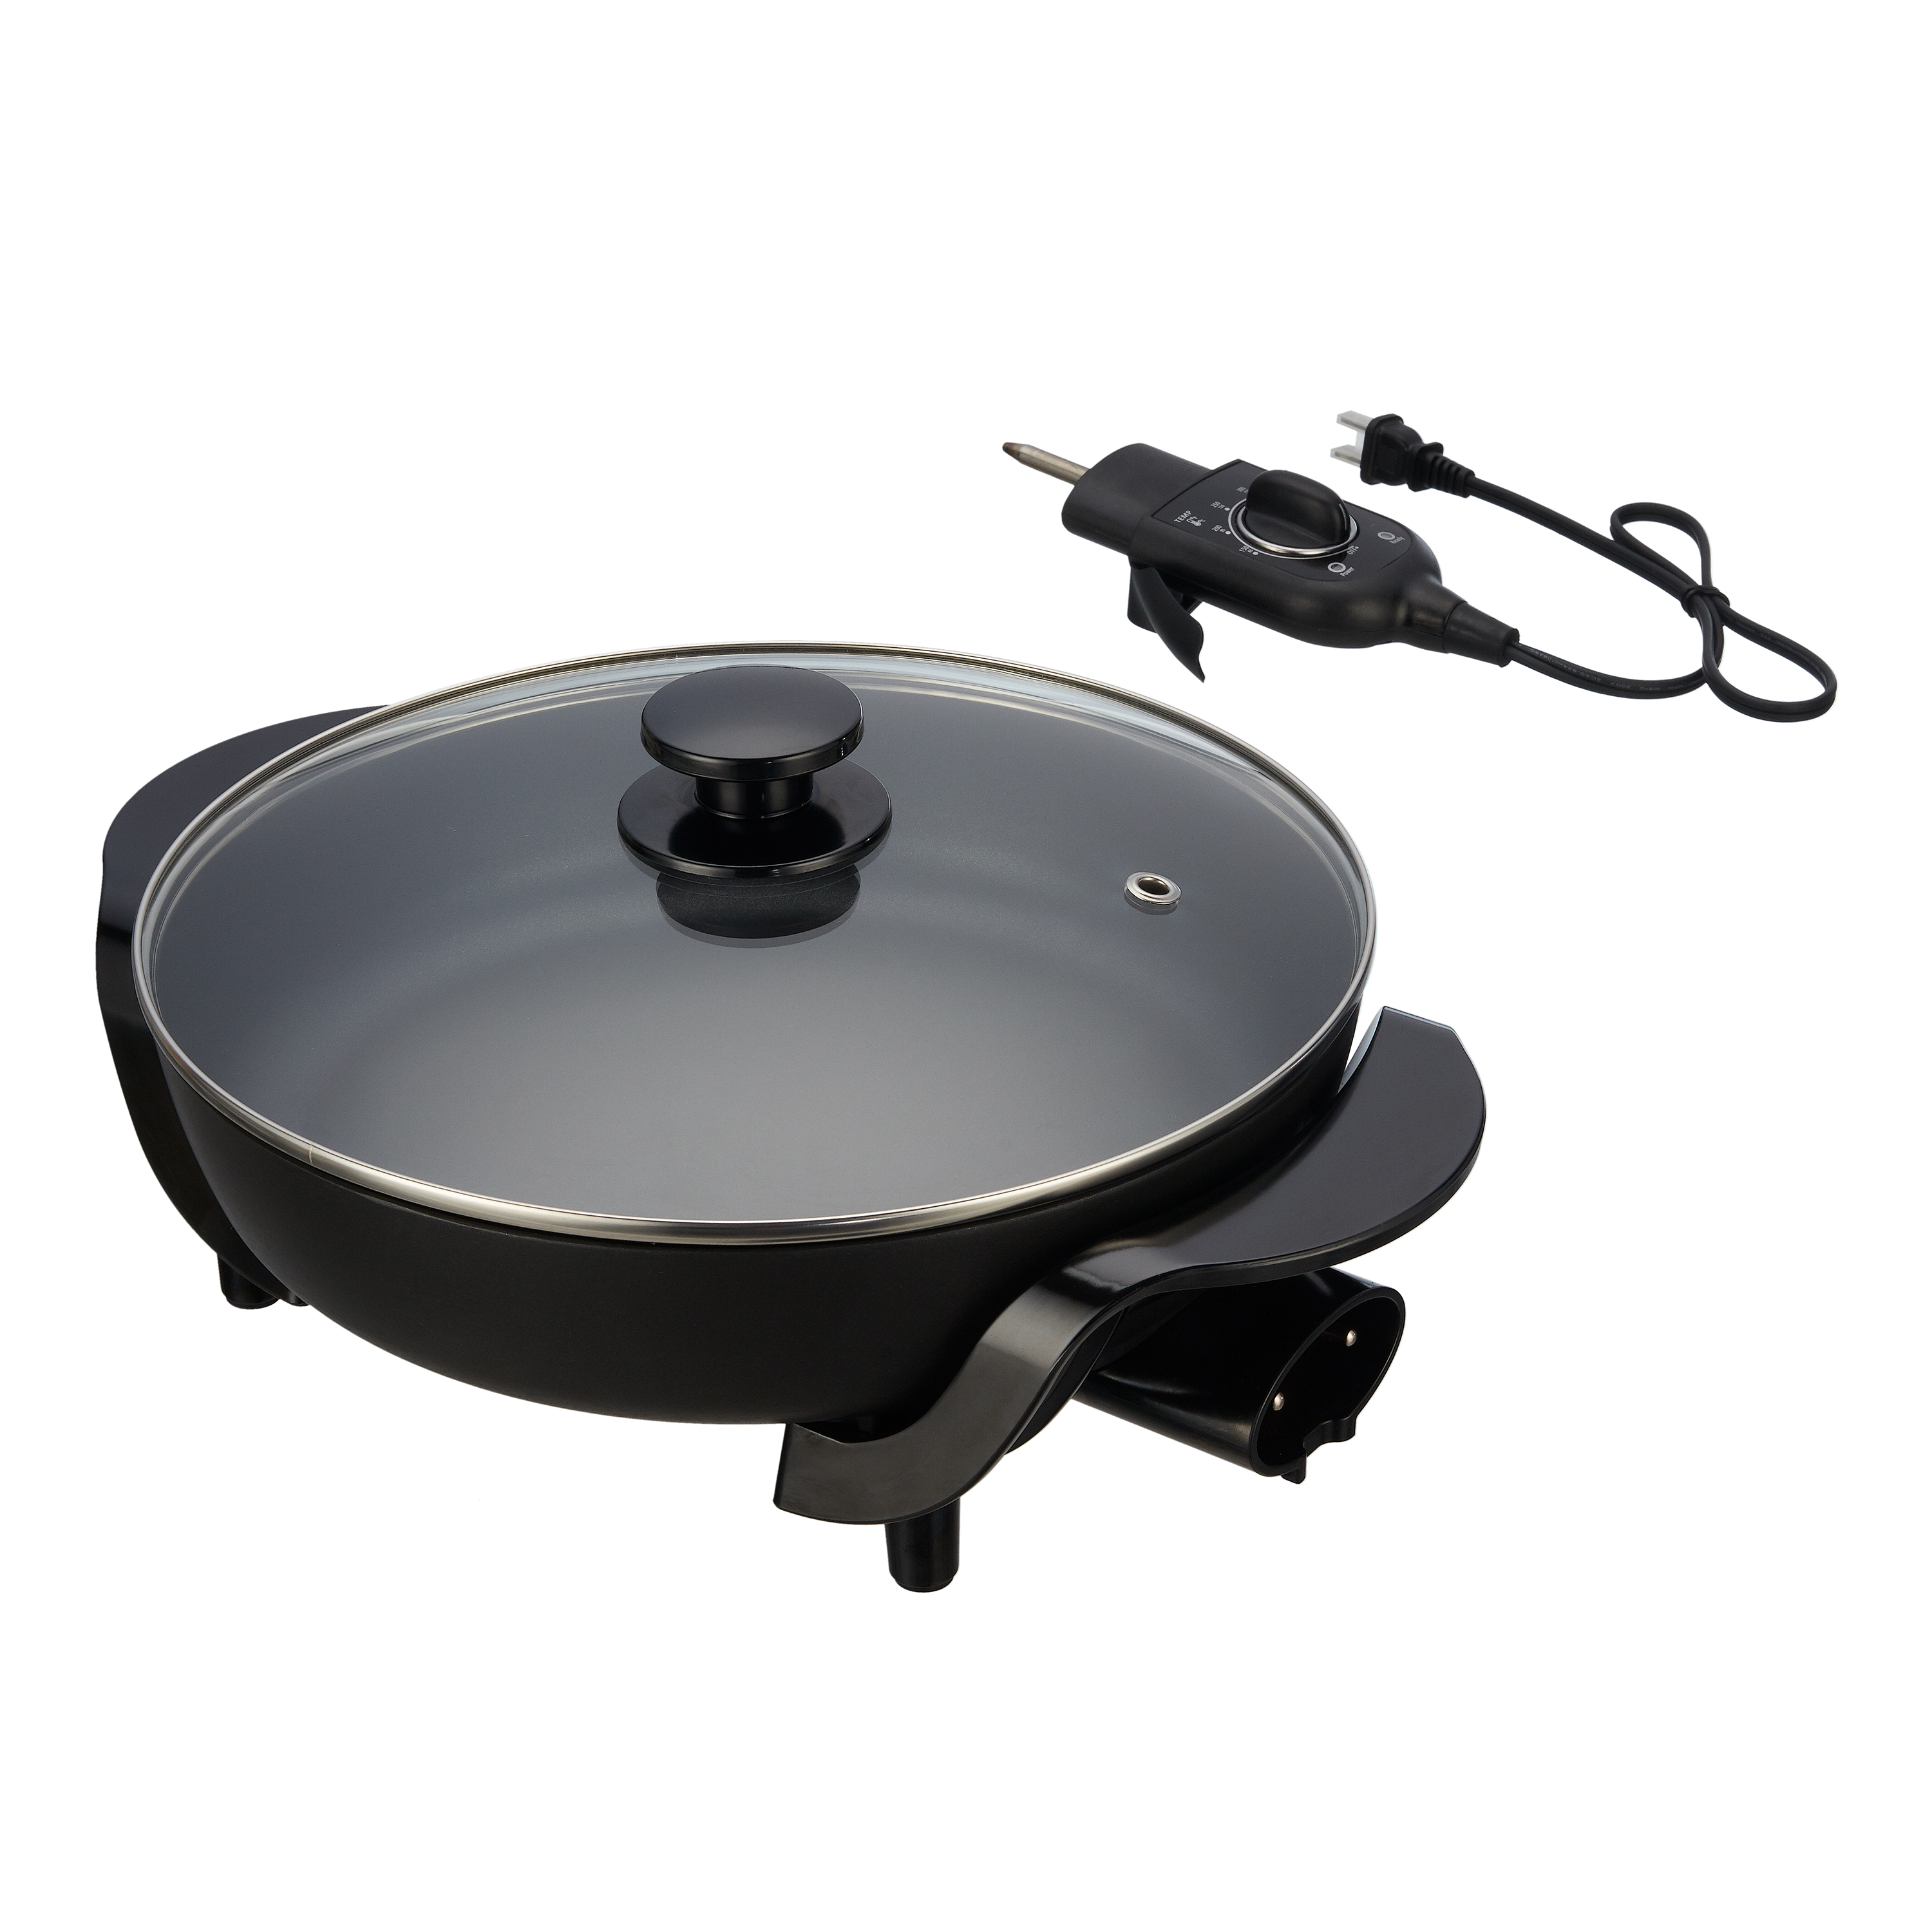 Mainstays 12" Round Nonstick Electric Skillet with Glass Cover, Black - image 1 of 6